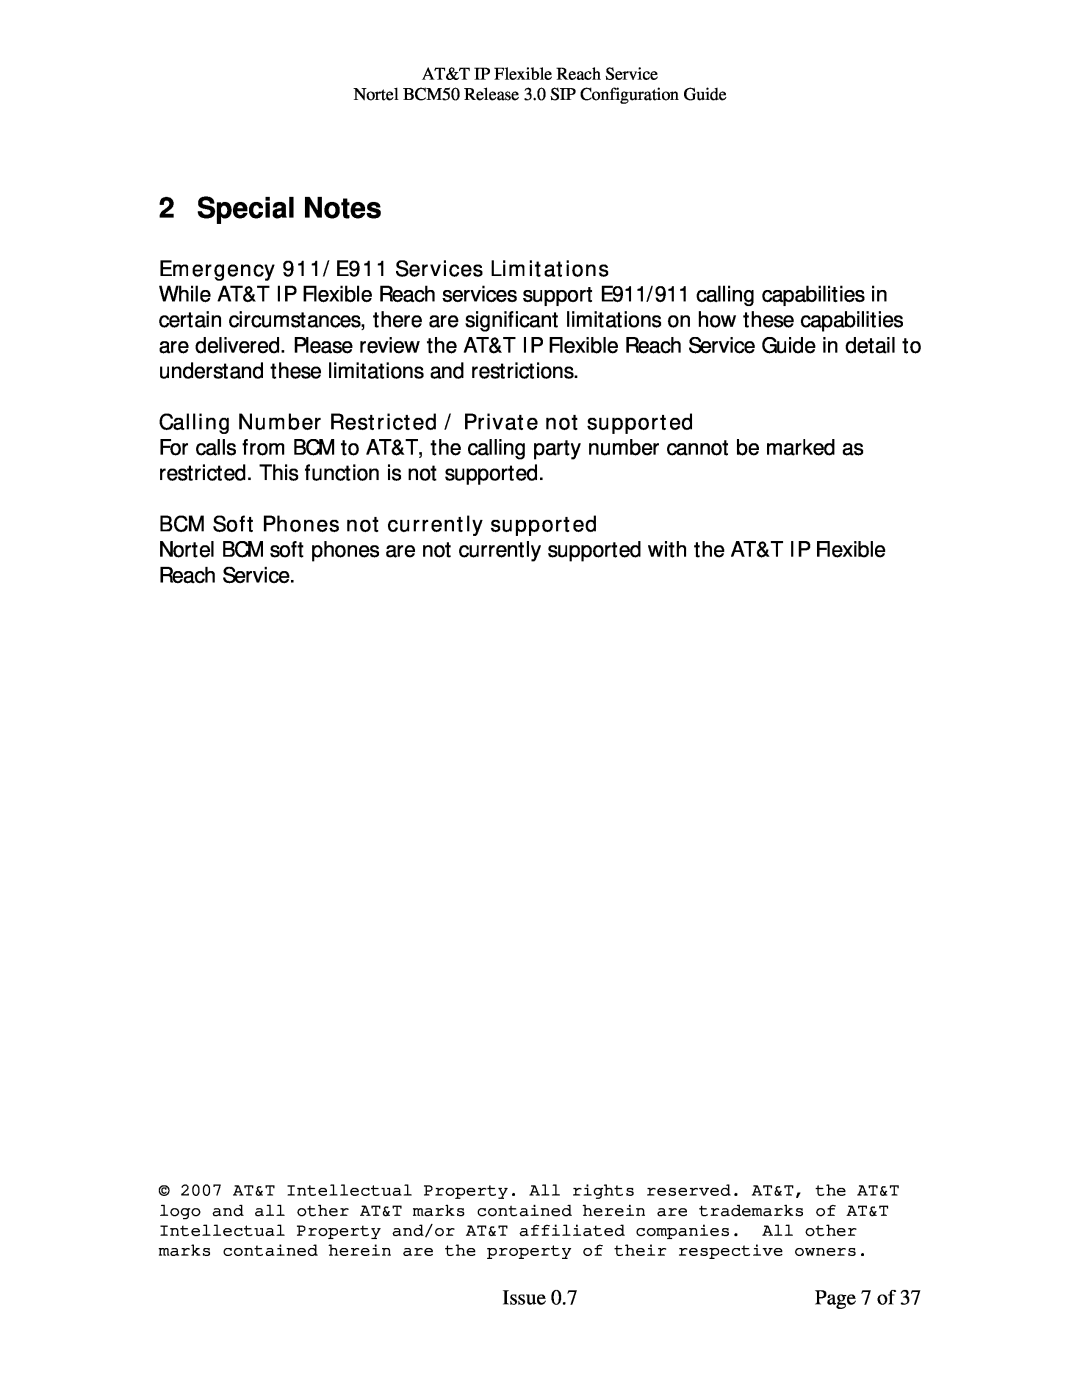 AT&T BCM50 manual Special Notes, Emergency 911/E911 Services Limitations, Calling Number Restricted / Private not supported 